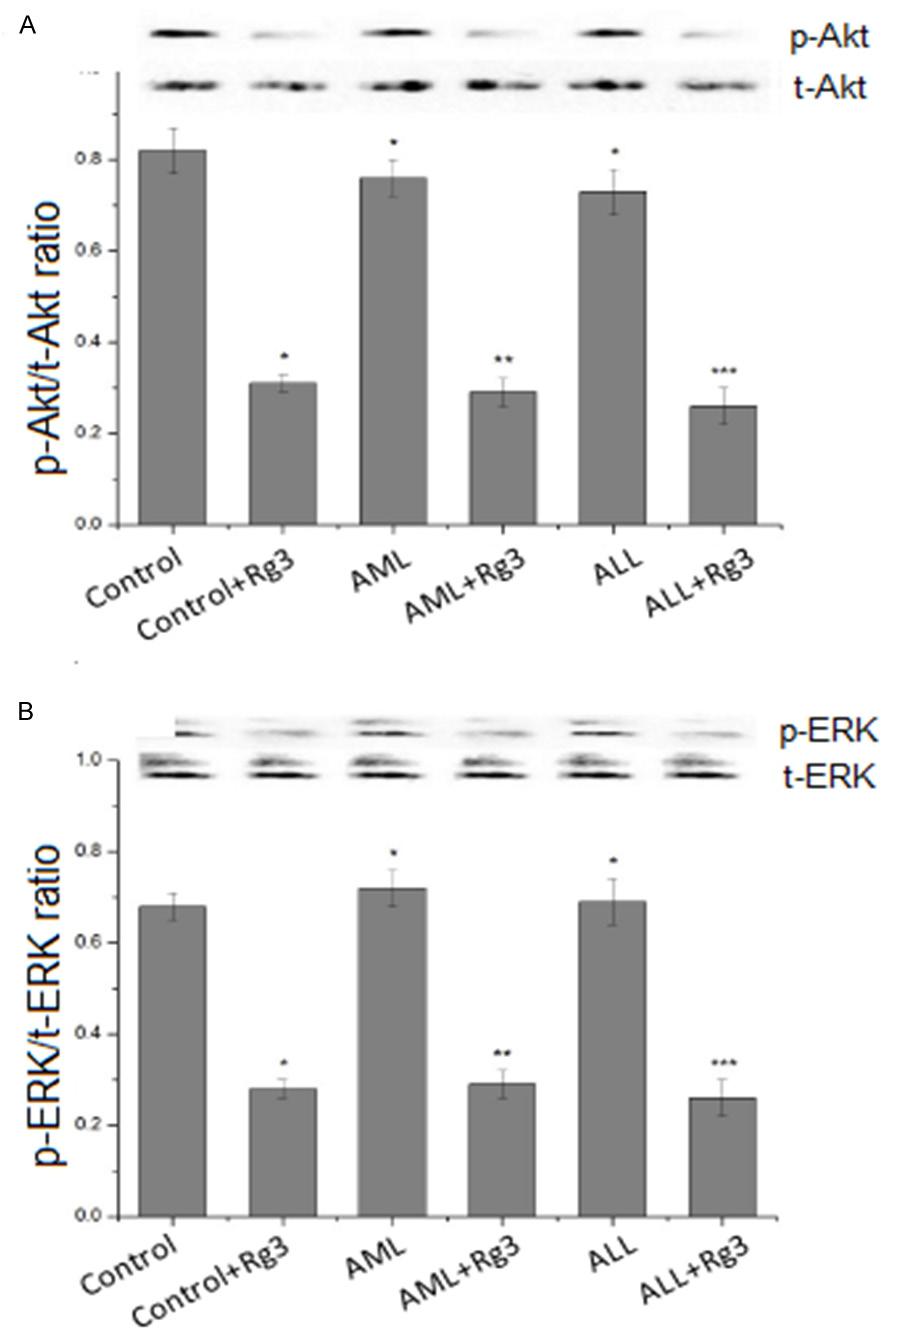 Figure 3. Rg3 inhibits the activation of Akt and ERK1/2 in BMSCs. BMSCs were seeded in 60-mm dishes, cultured to 80~90% confluence, and treated with 40 mg/l Rg3 for 24 h.